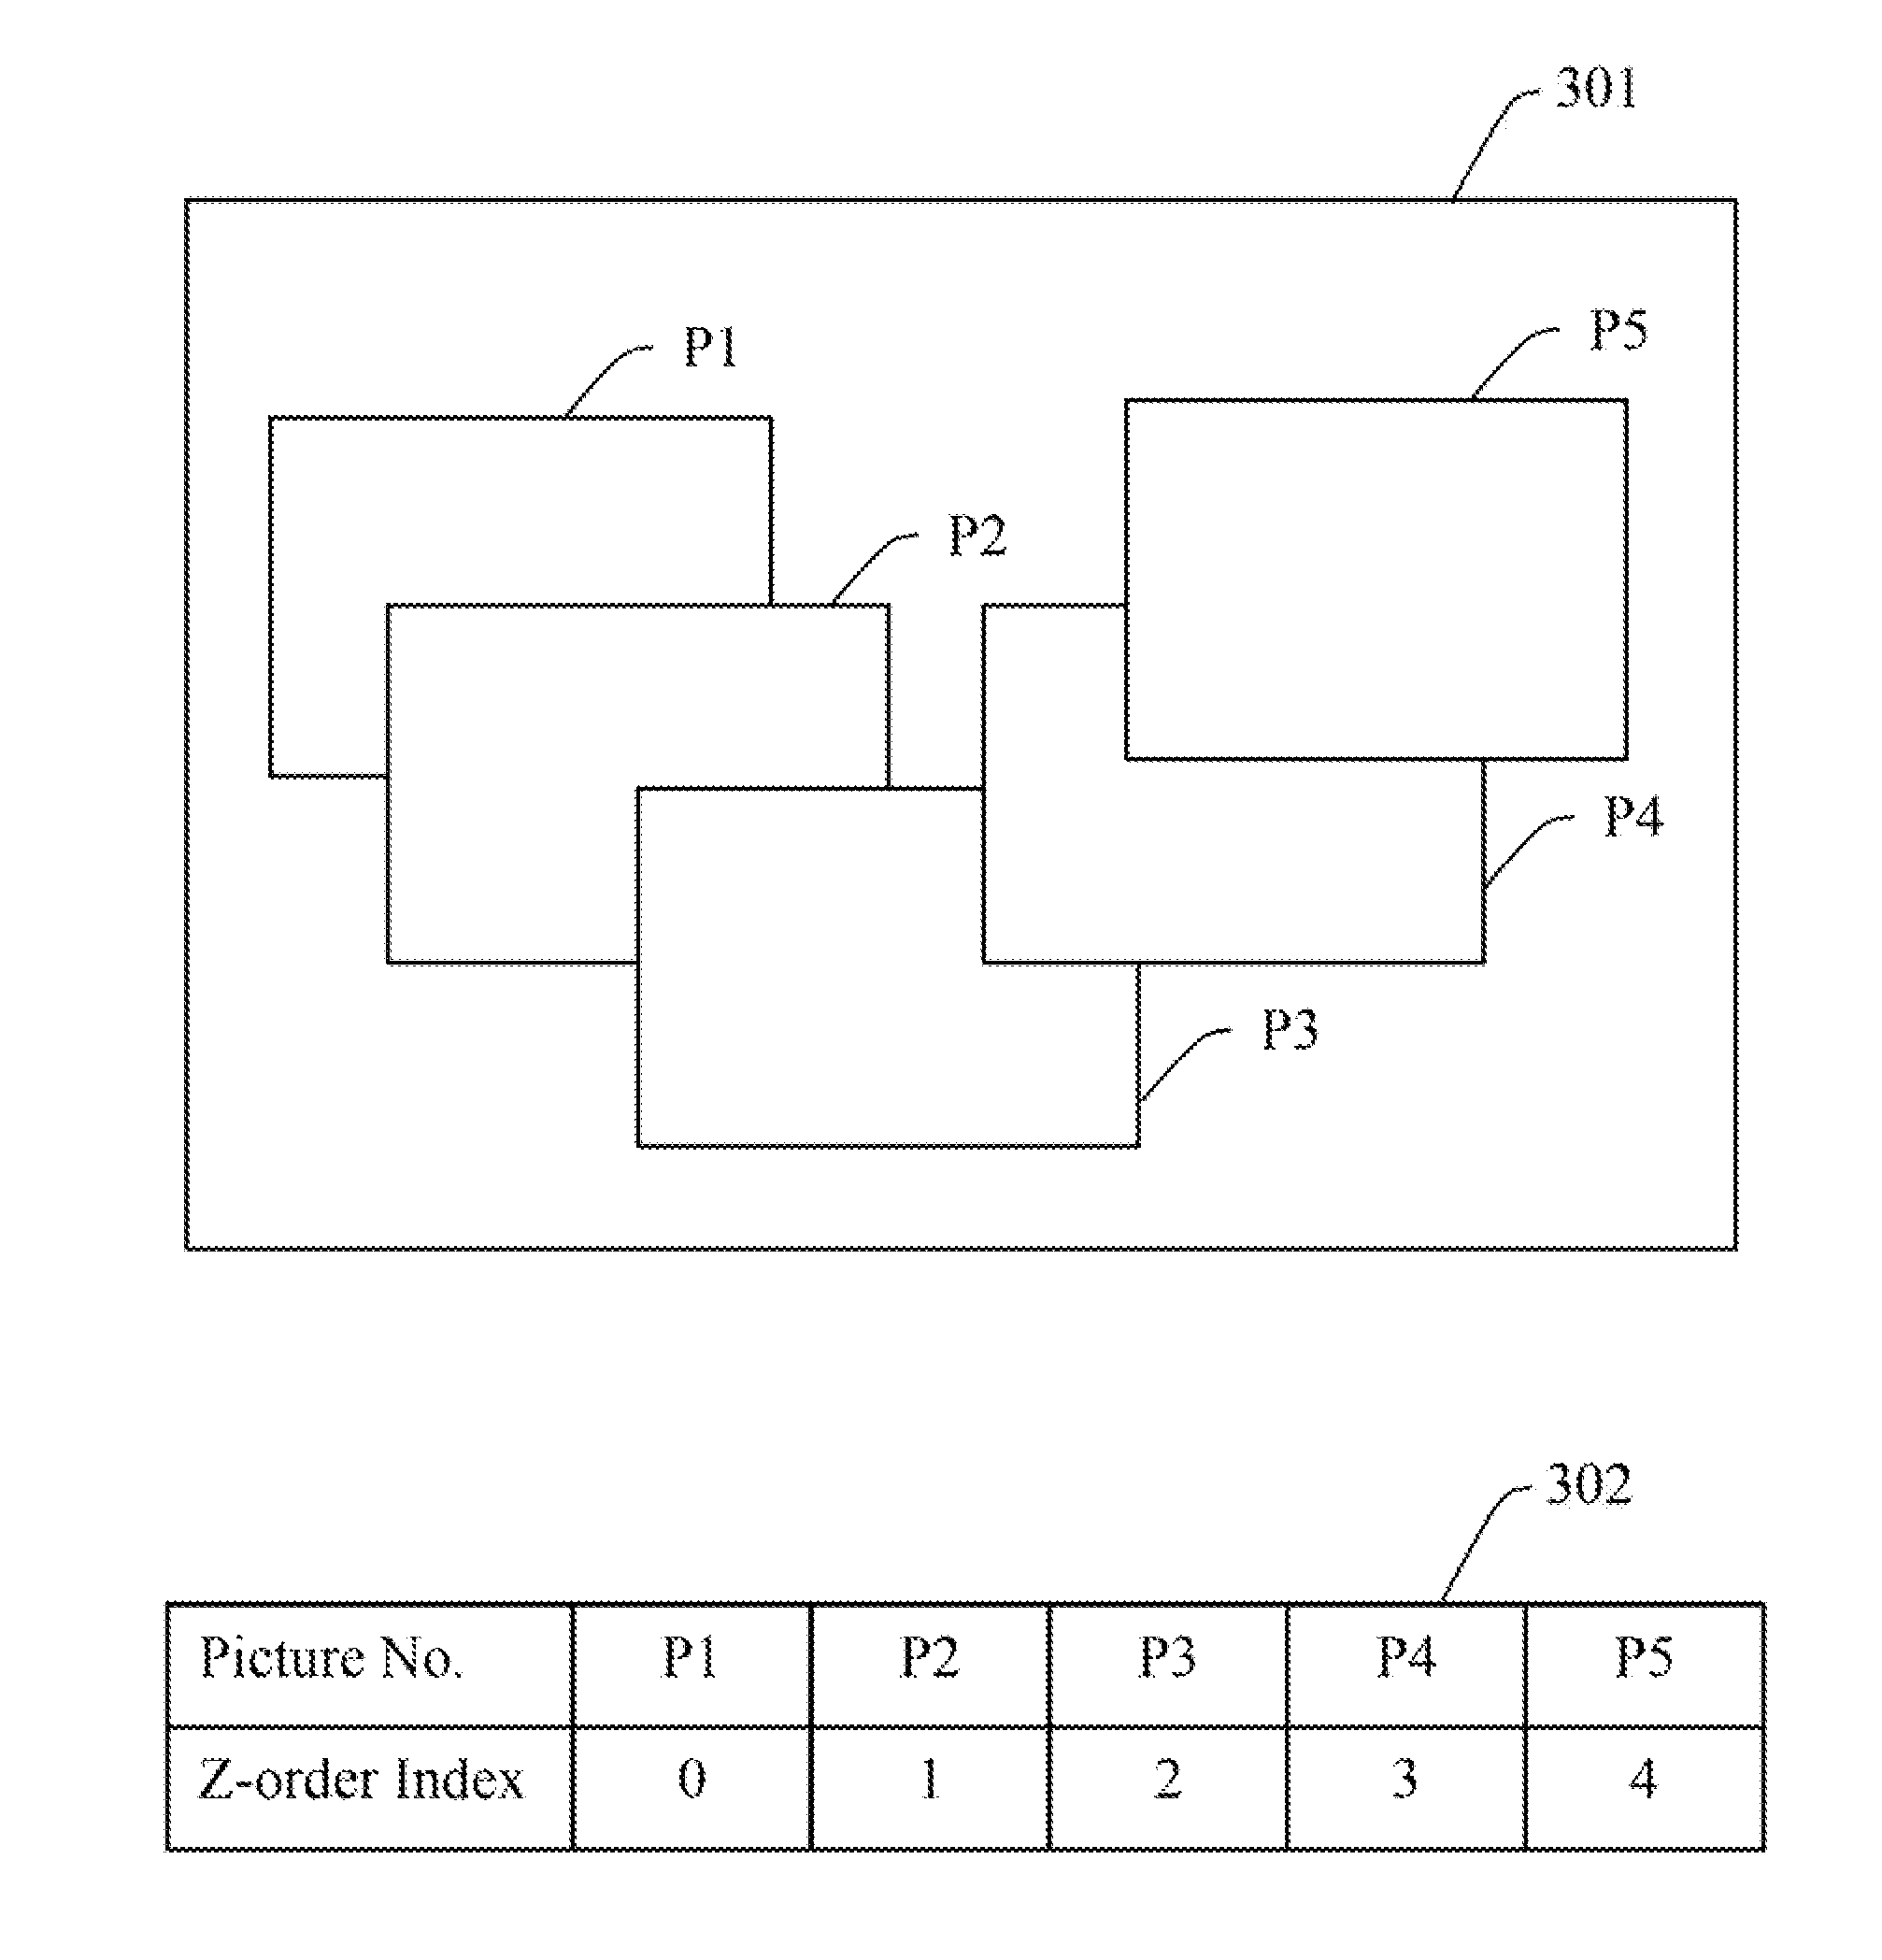 System and method for presenting pictures on touch sensitive screen